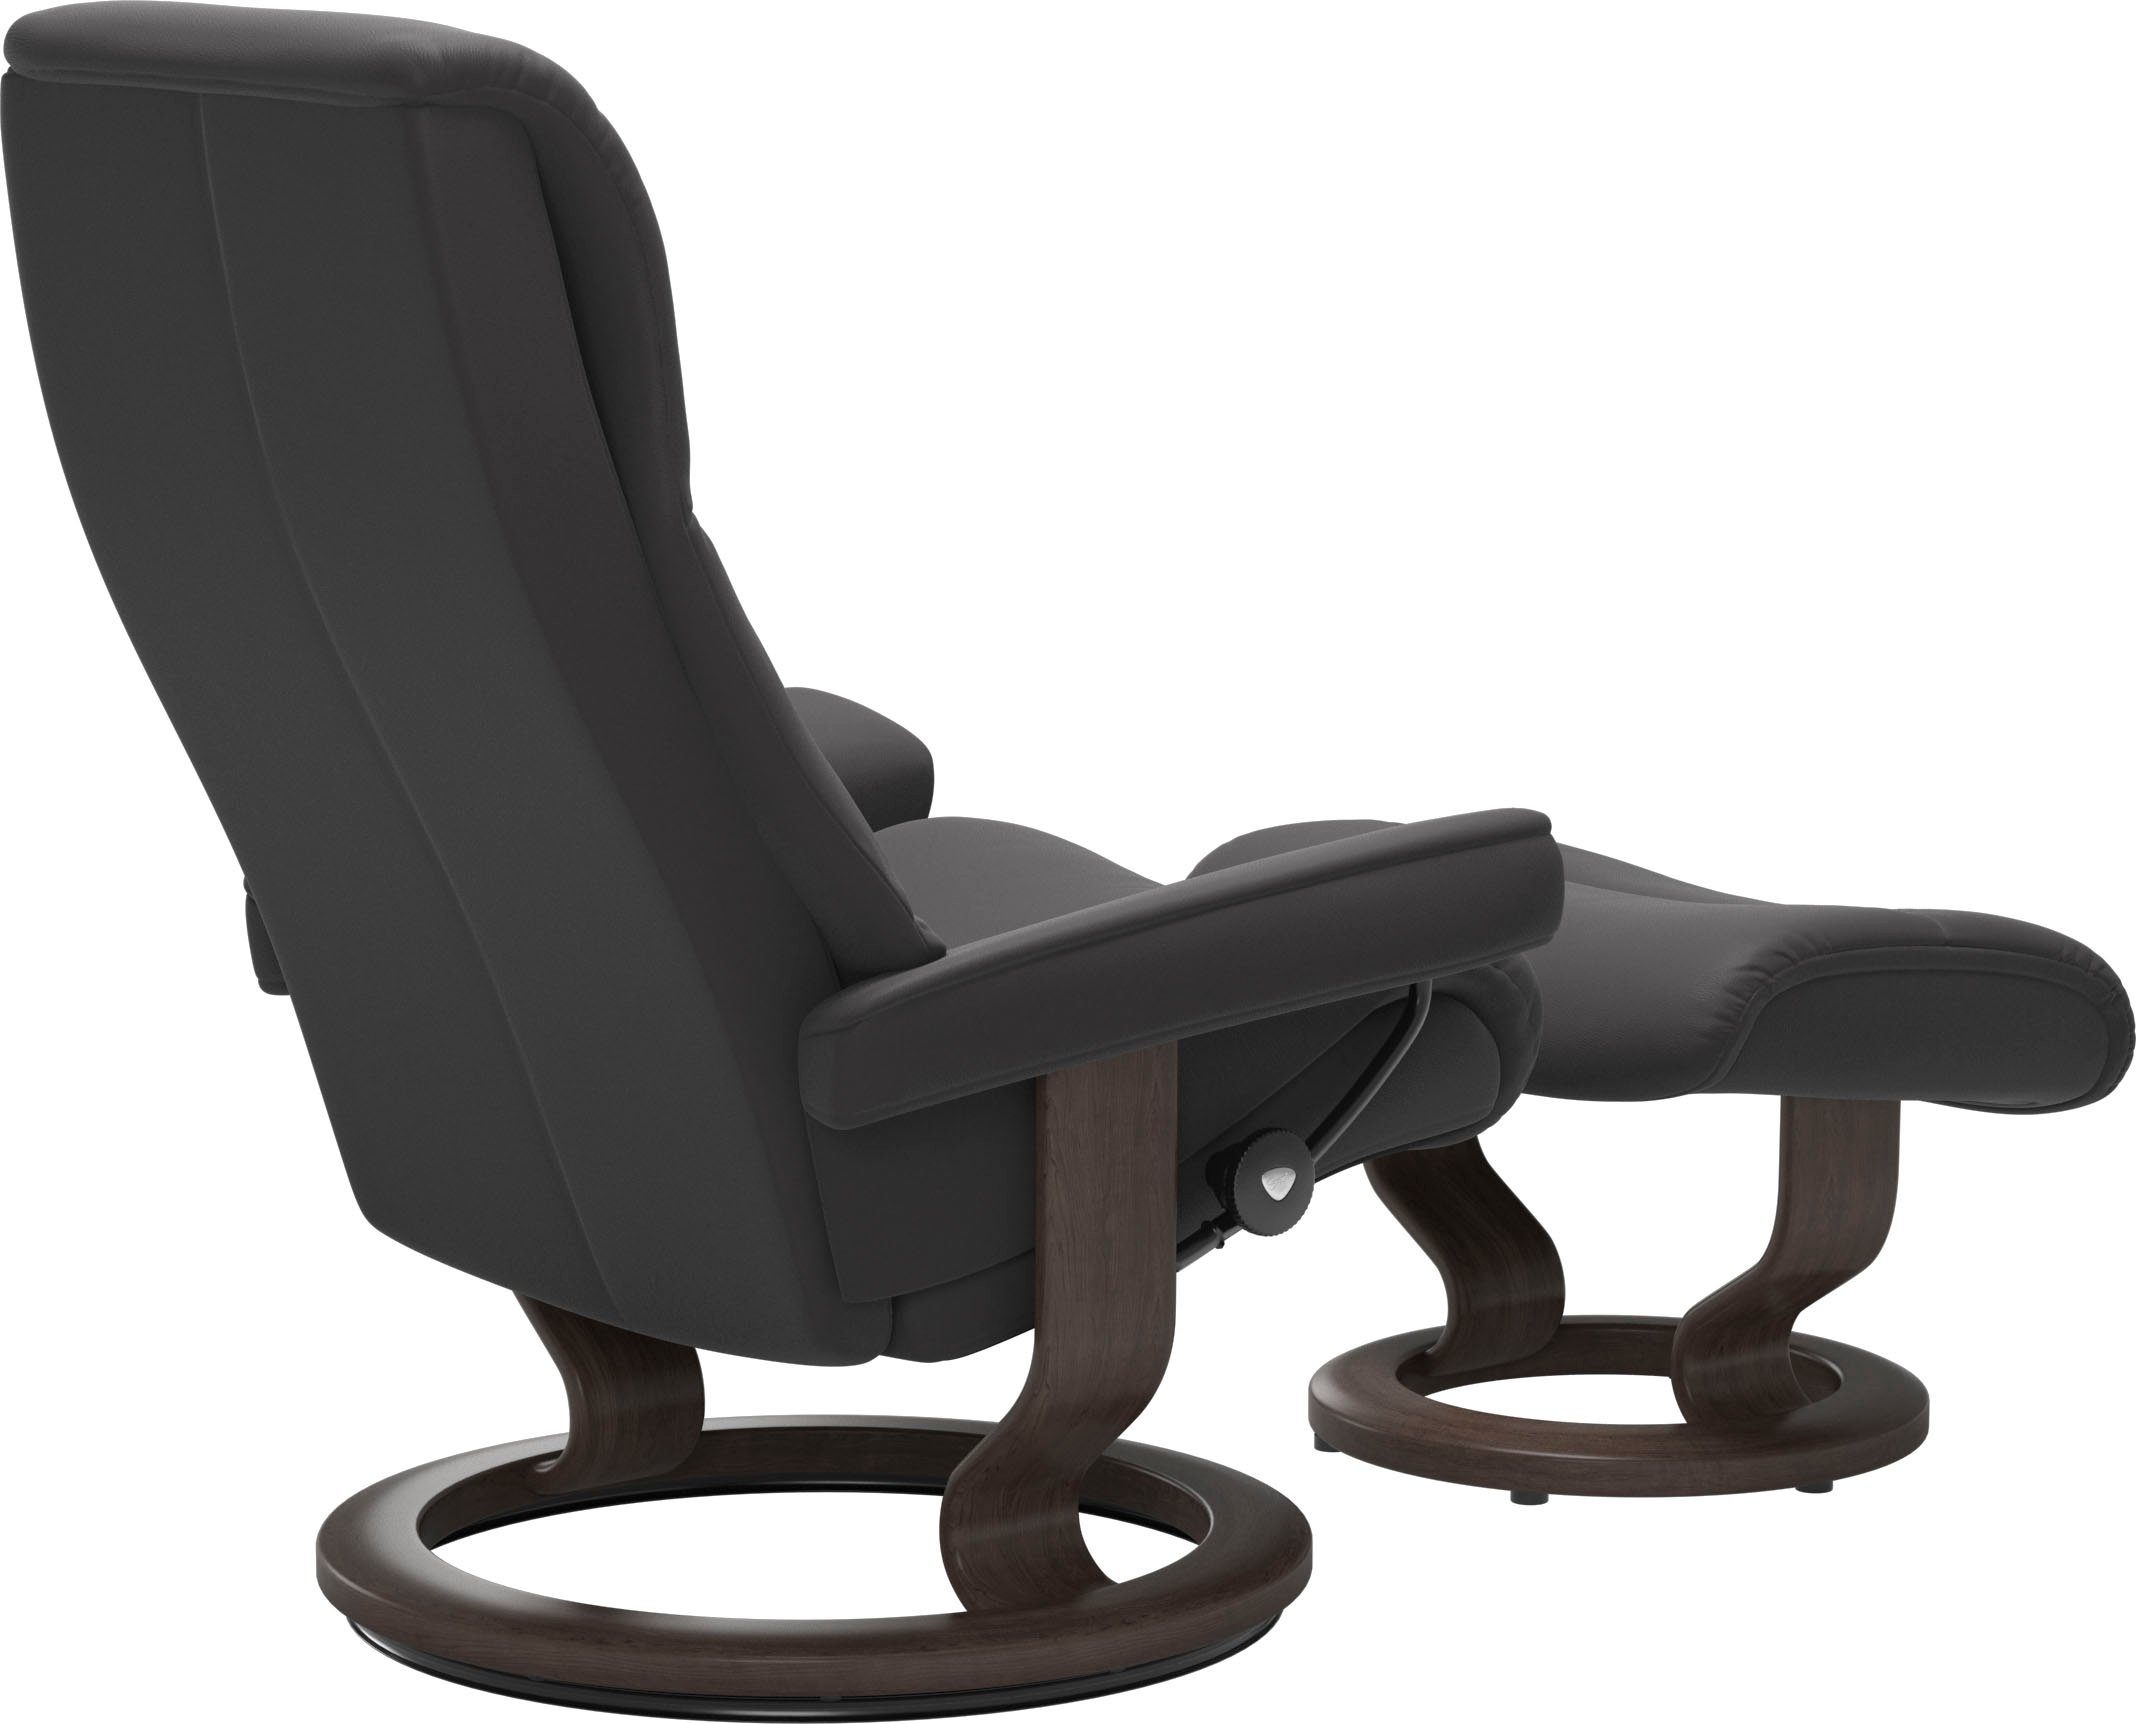 Stressless® Relaxsessel View, mit Größe Classic S,Gestell Wenge Base